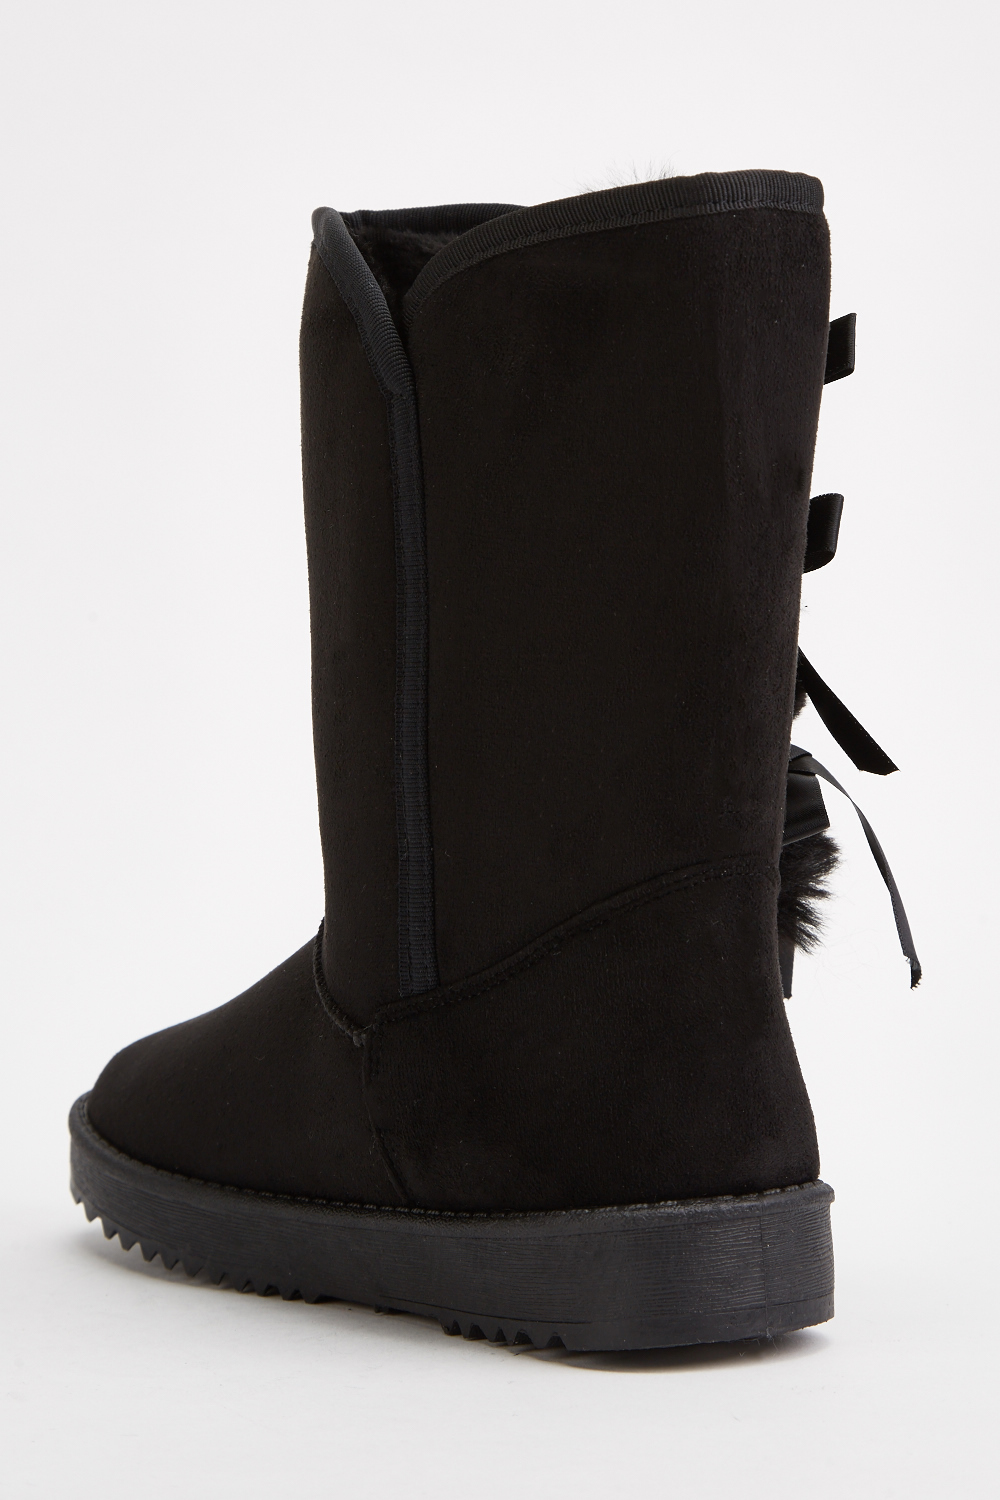 Ribbon Bow Side Winter Boots - Just $7